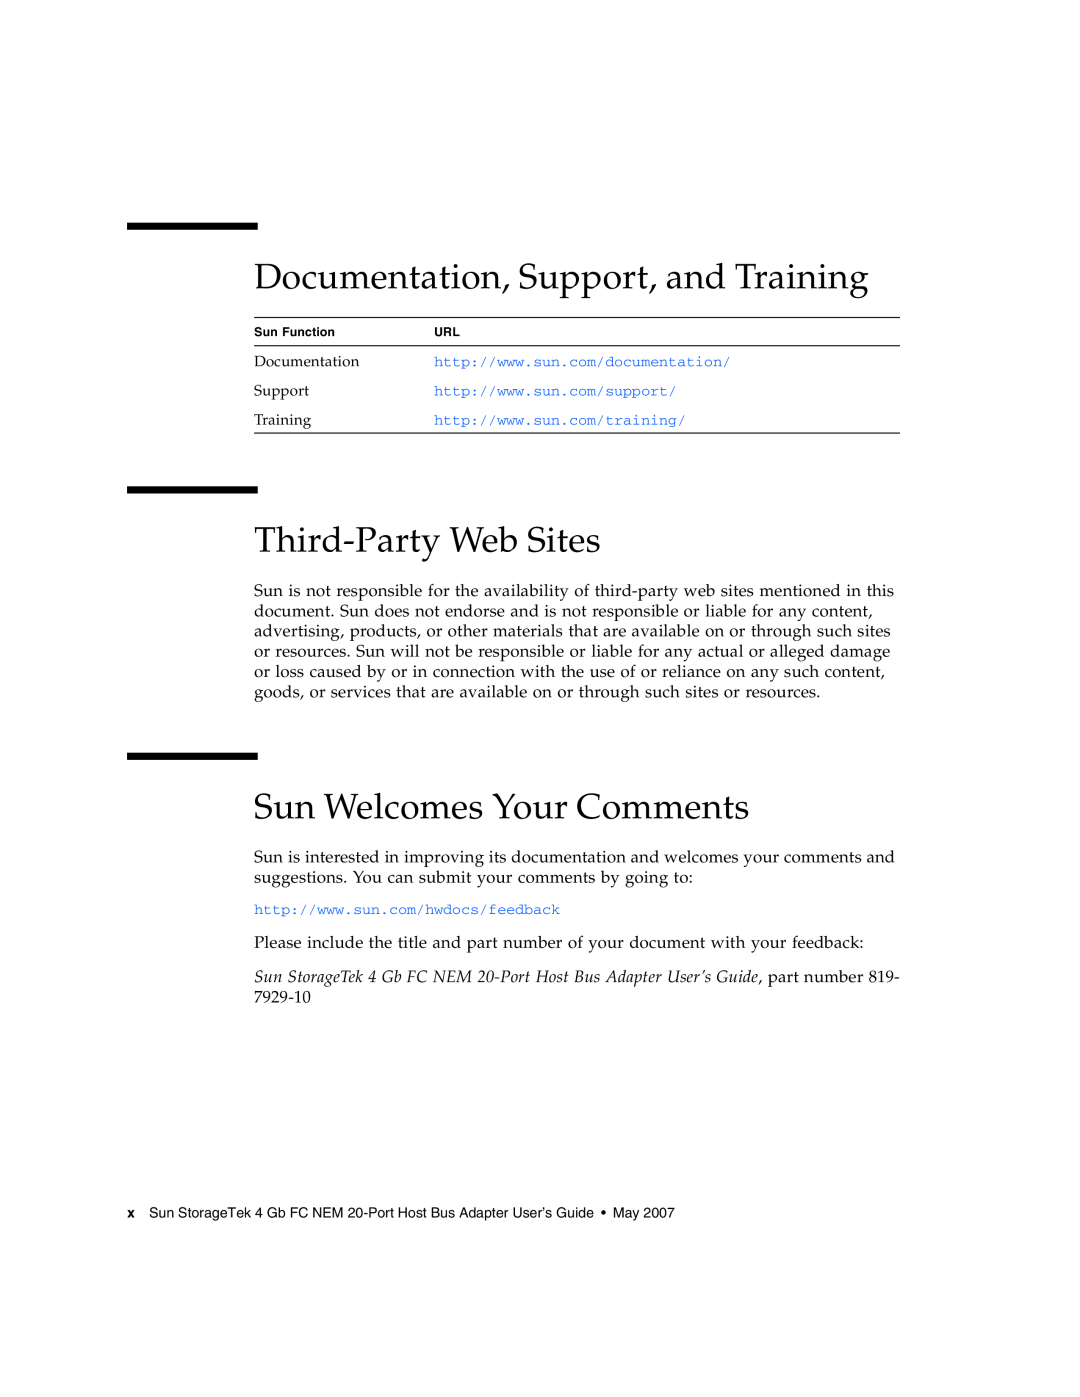 Sun Microsystems 2.0 Documentation, Support, and Training, Third-Party Web Sites, Sun Welcomes Your Comments, Sun Function 